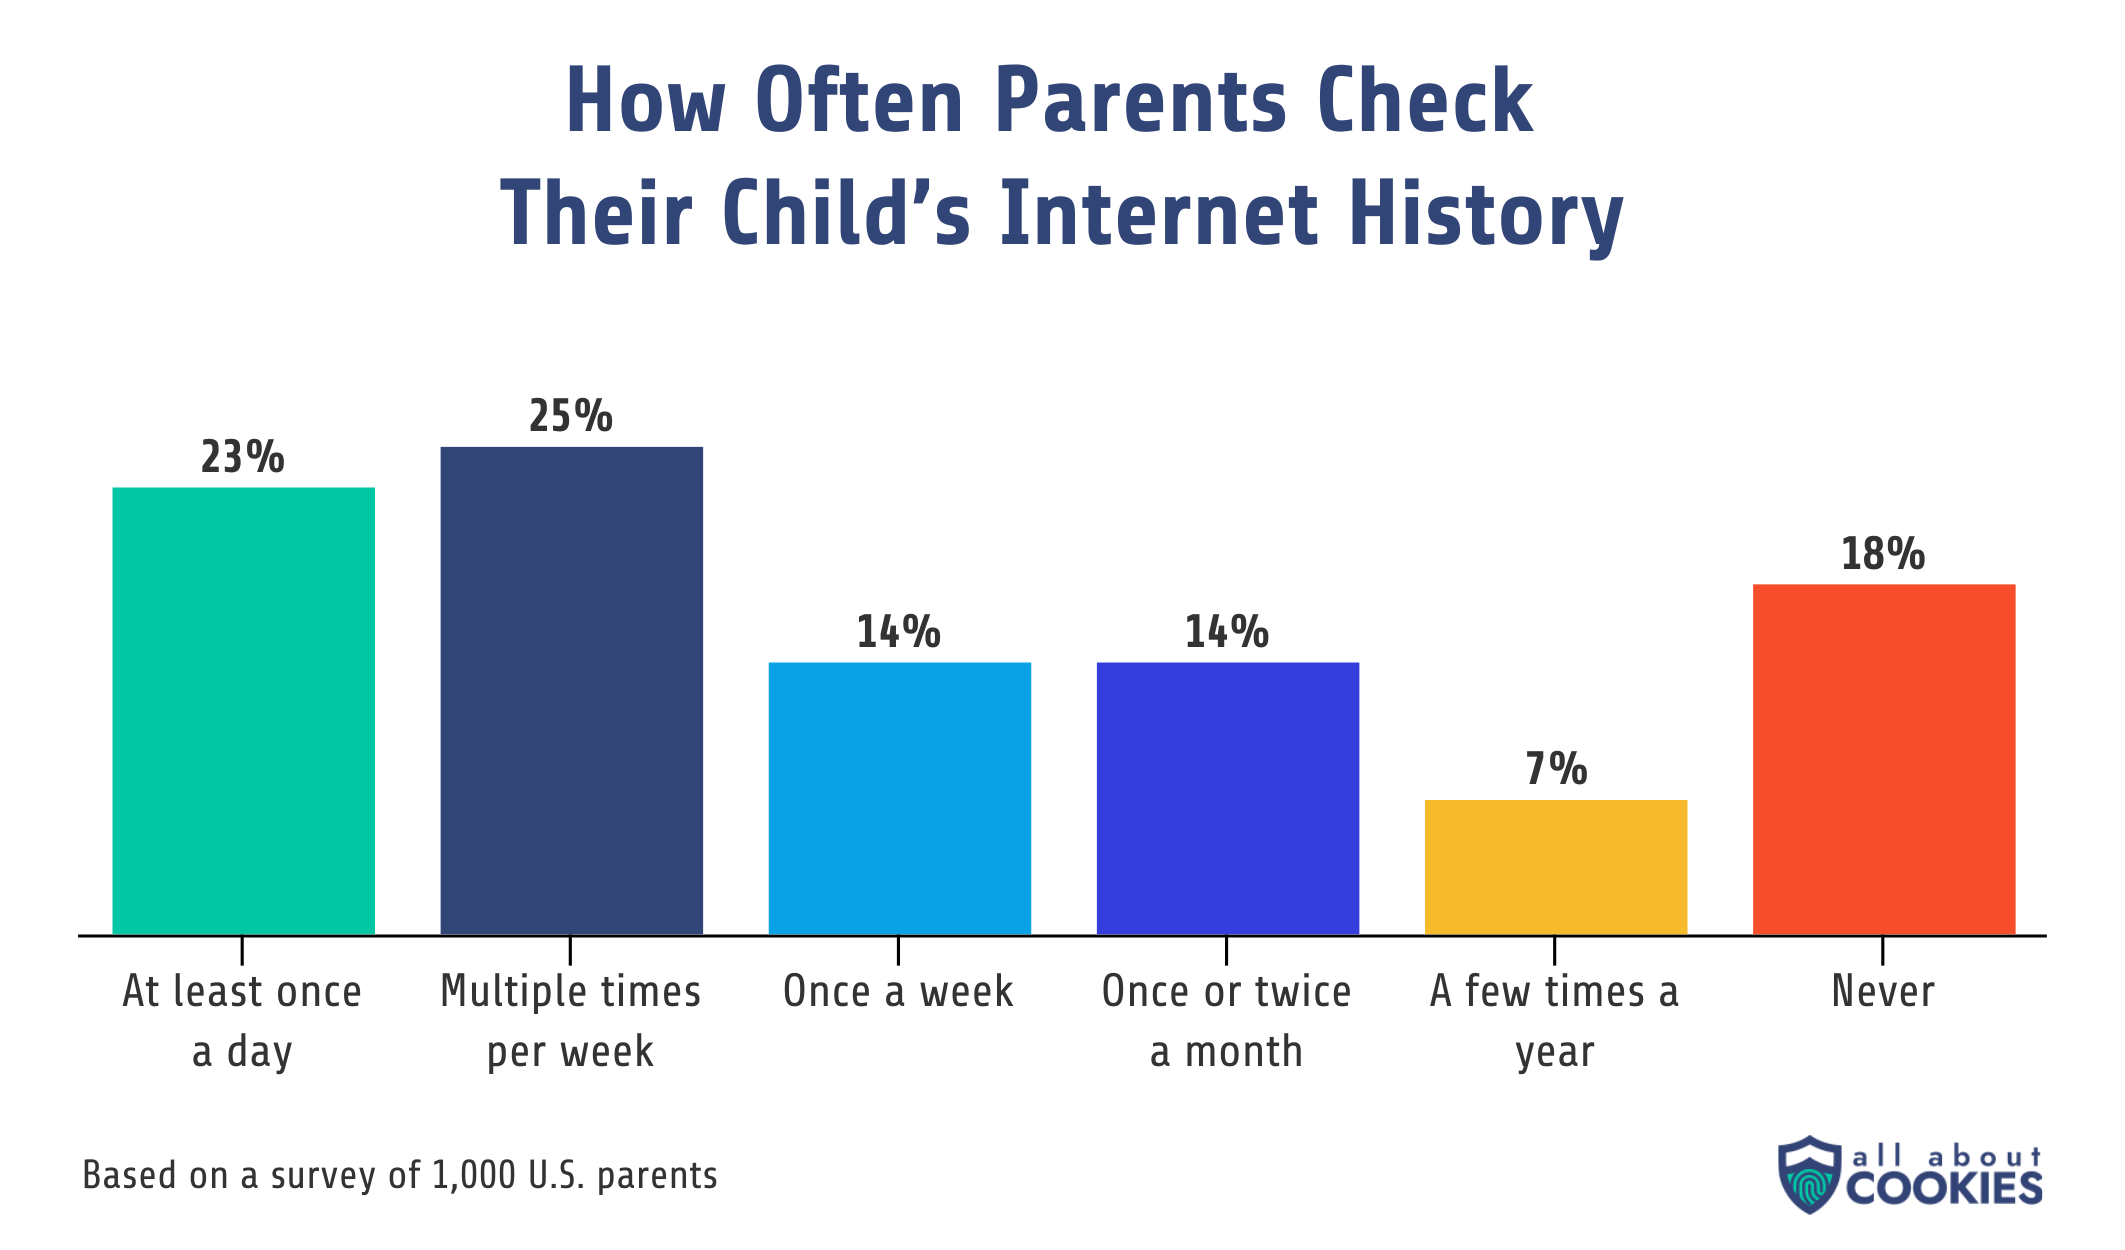 A bar chart shows 23% of parents check their child's internet history at least once a day, while 25% check multiple times a week. 18% never check the history.